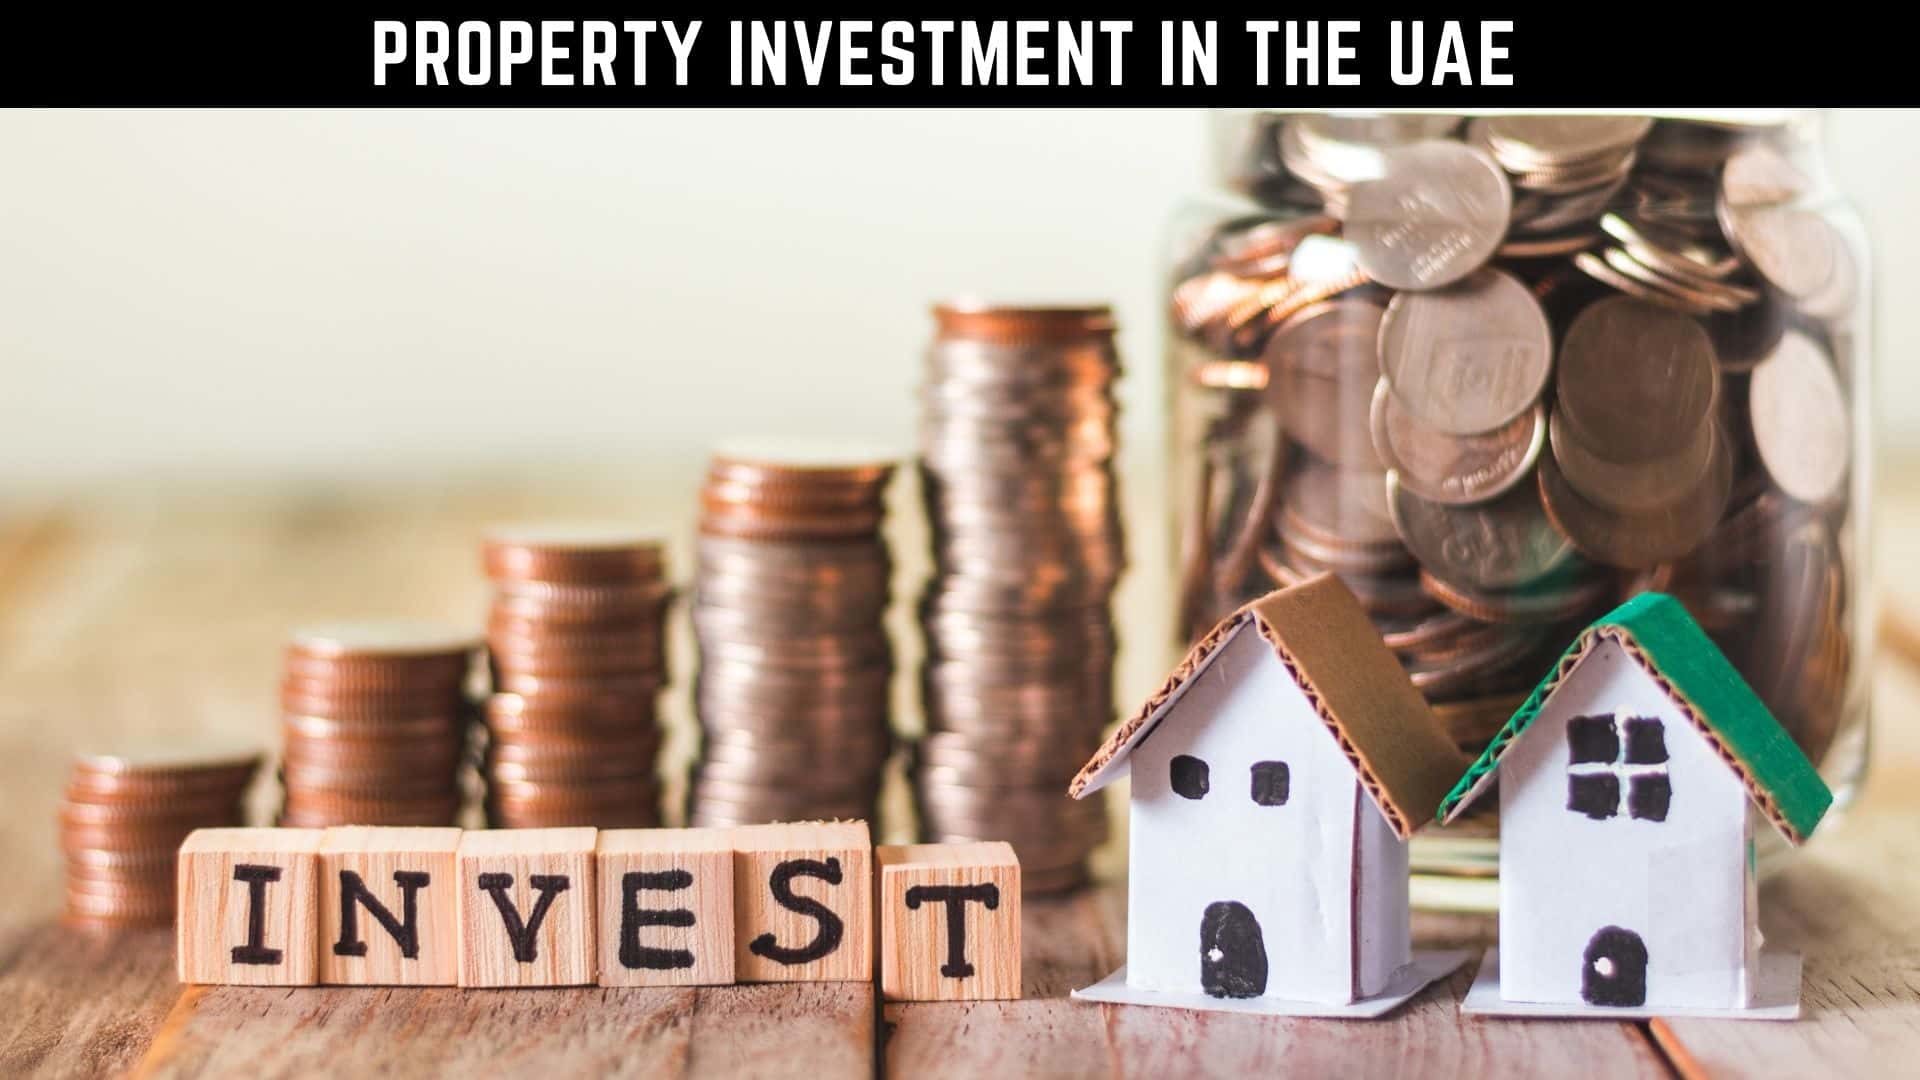 How to Invest Money in UAE by 10 Ways [Investing Guide]